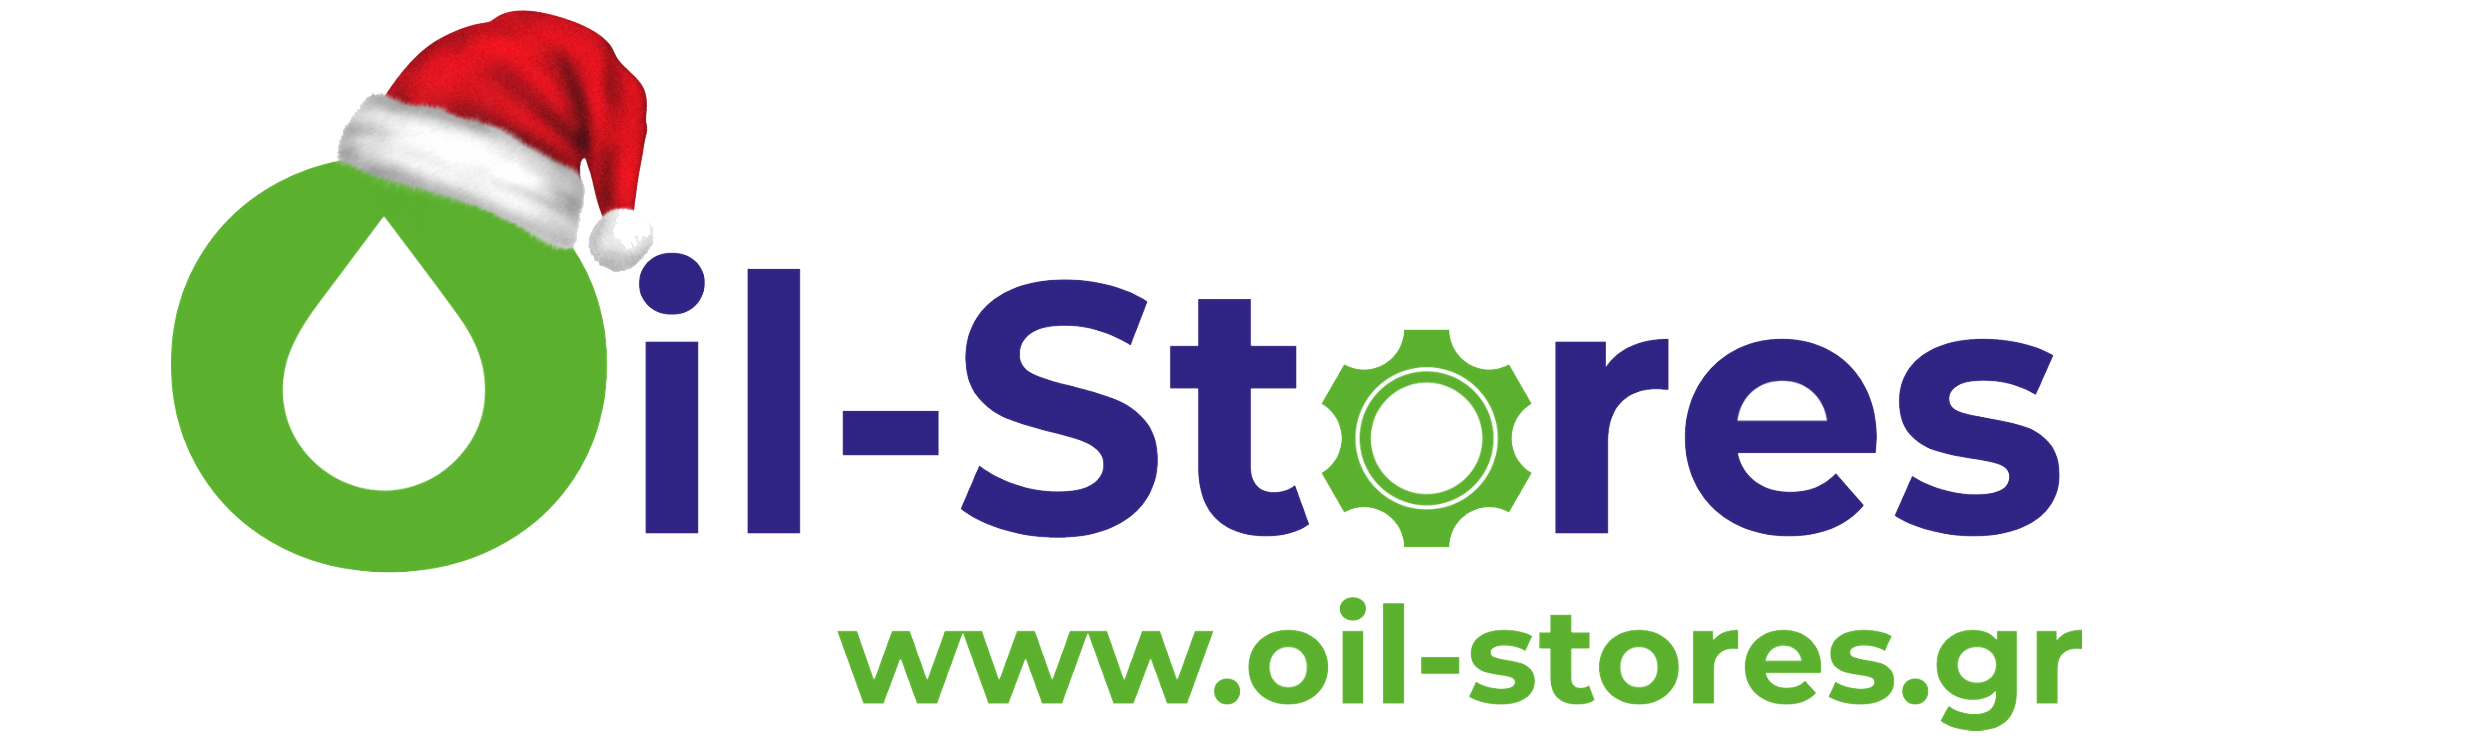 Oil-Stores